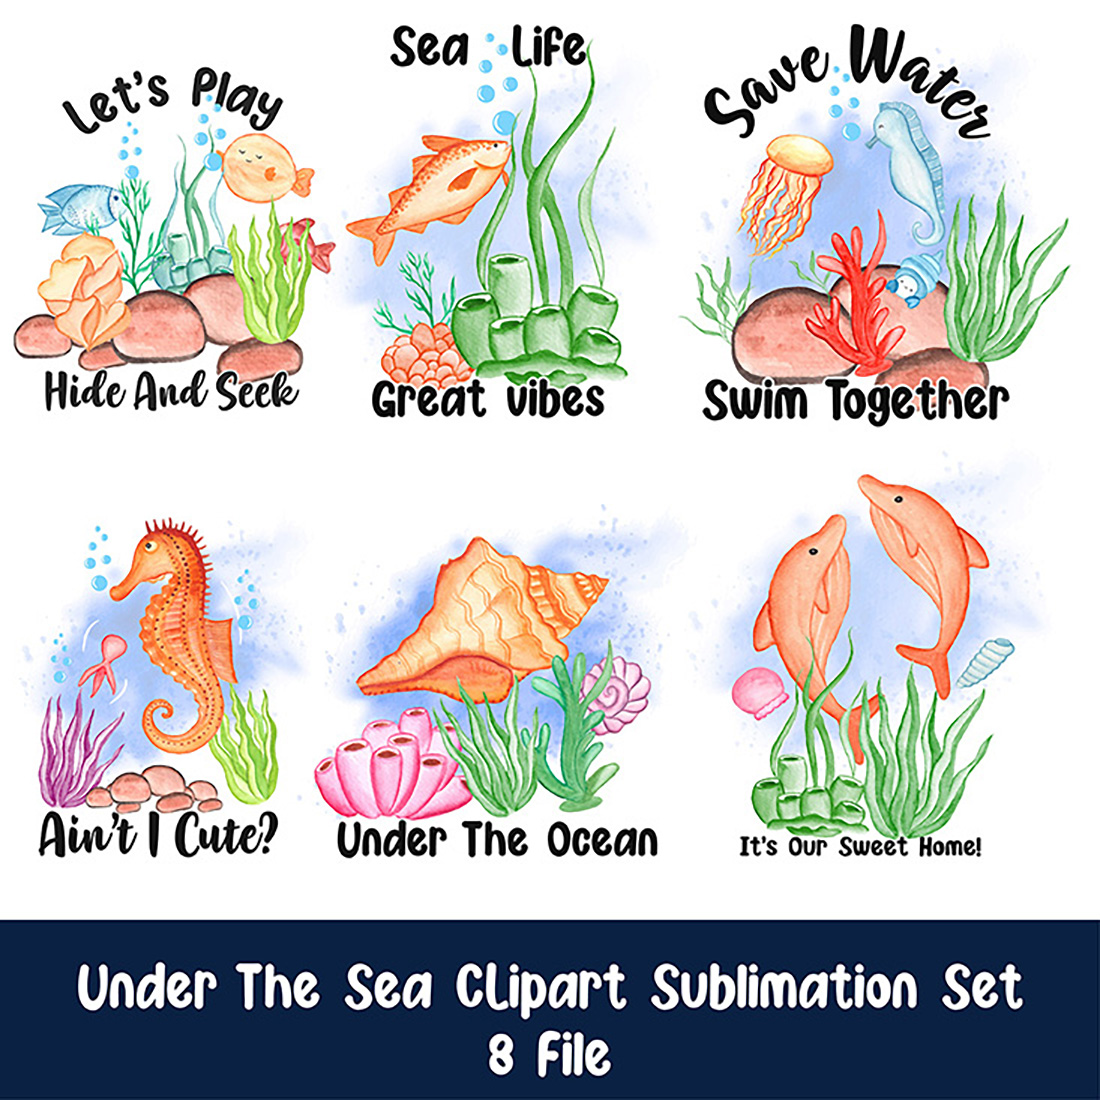 Watercolor Under The Sea Clipart Set, Under The Sea Sublimation main cover.